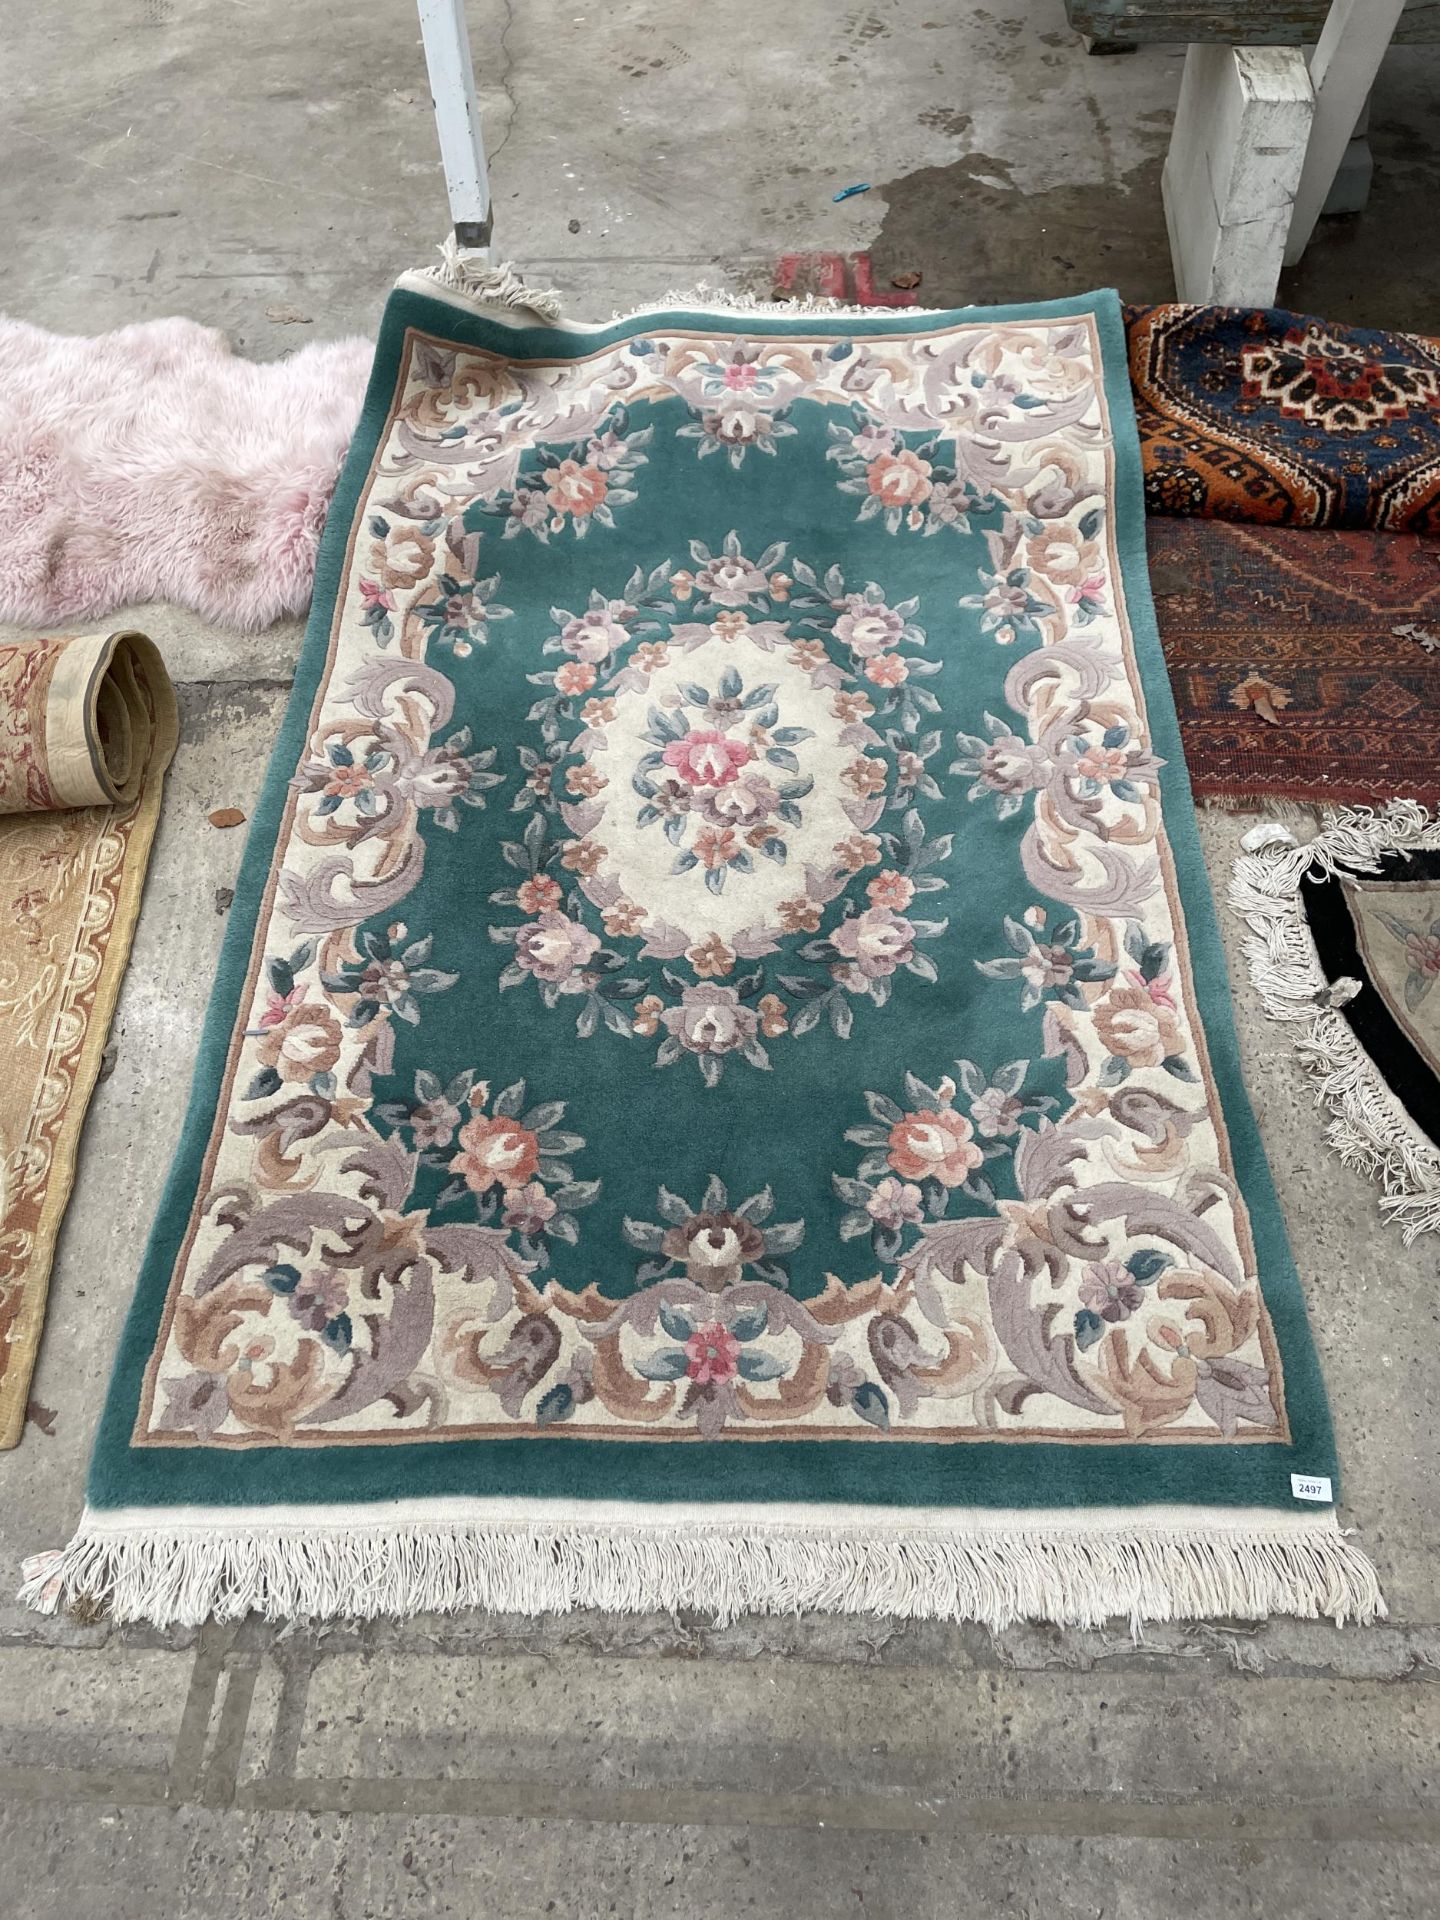 A GREEN PATTERNED FRINGED RUG